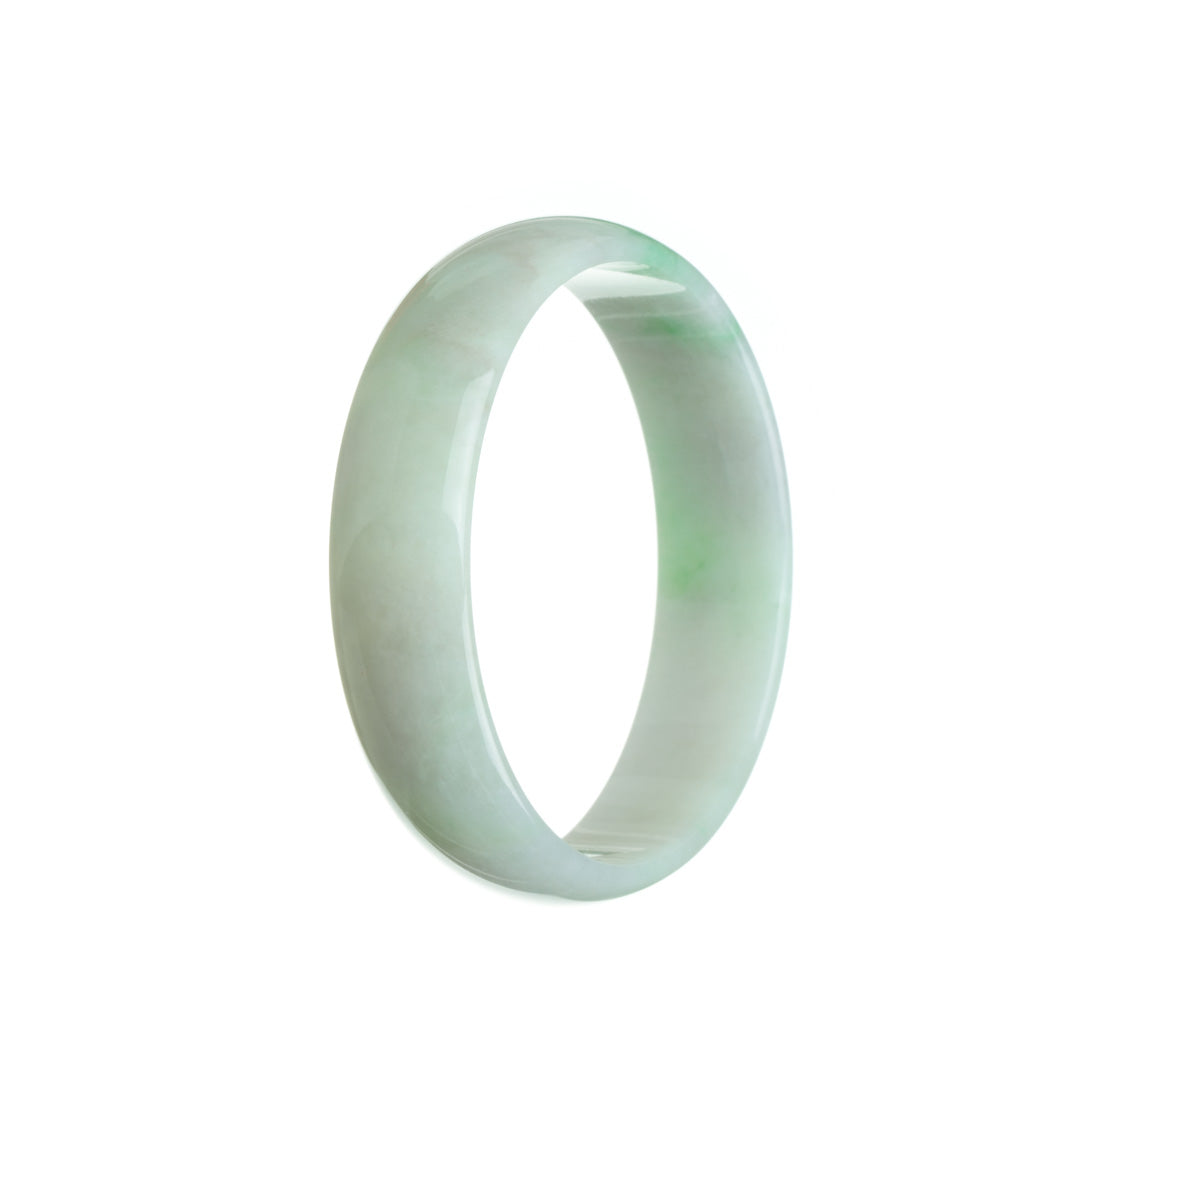 Close-up image of a flat, 52mm white with green jade bracelet. The jade appears smooth and polished, showcasing its natural beauty. The bracelet is crafted with genuine Grade A jade, making it a high-quality piece. It exudes elegance and sophistication, perfect for adding a touch of luxury to any outfit.